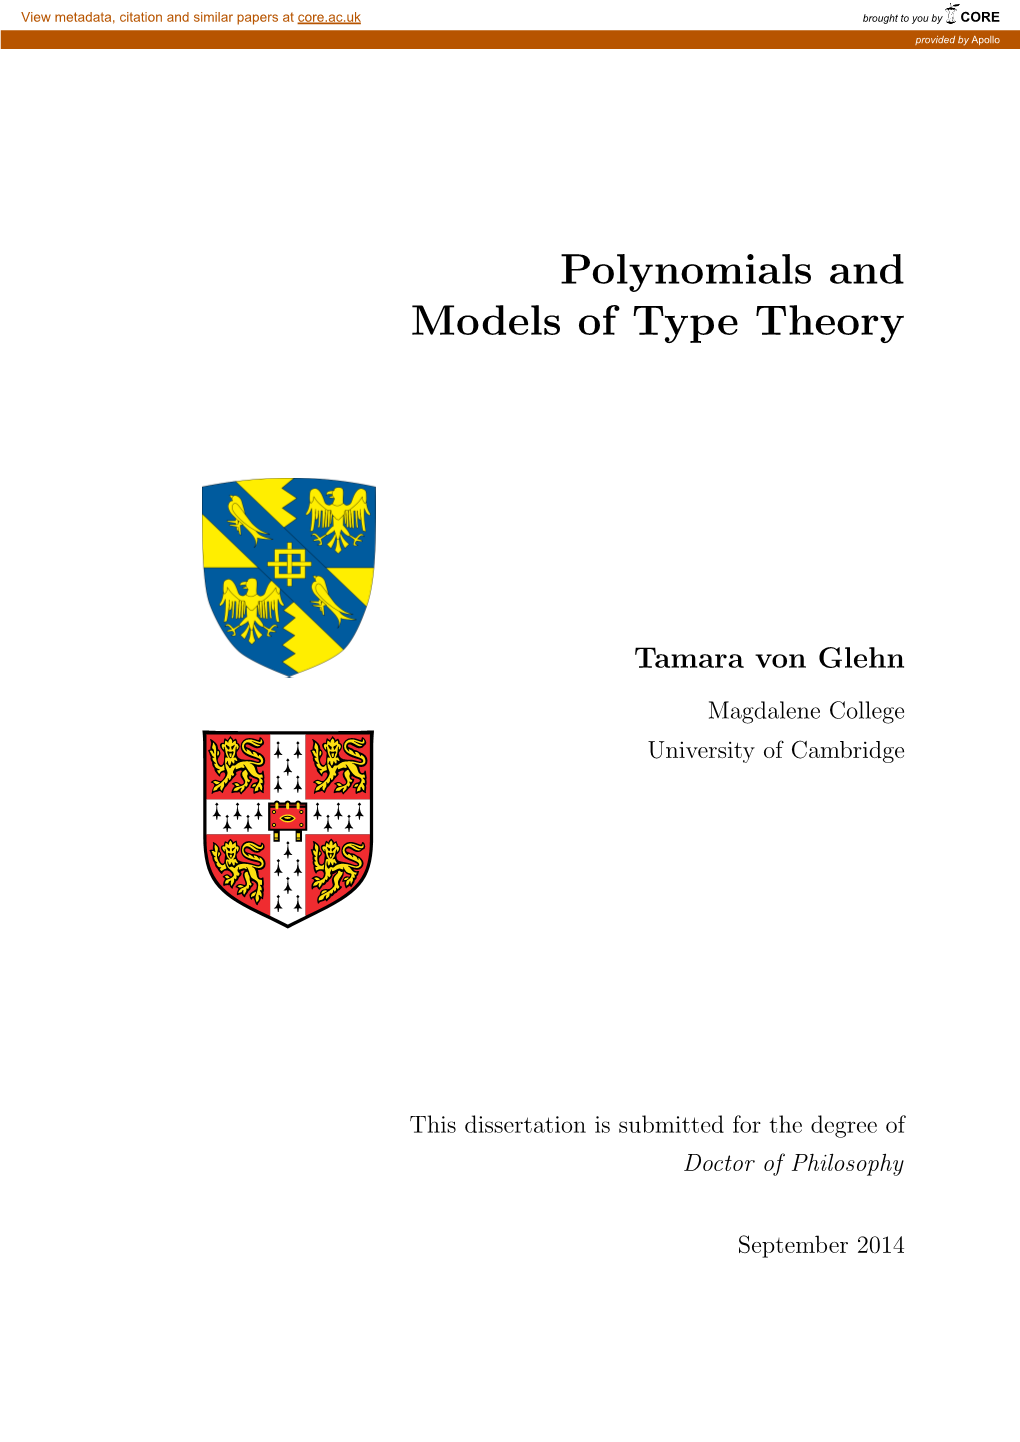 Polynomials and Models of Type Theory